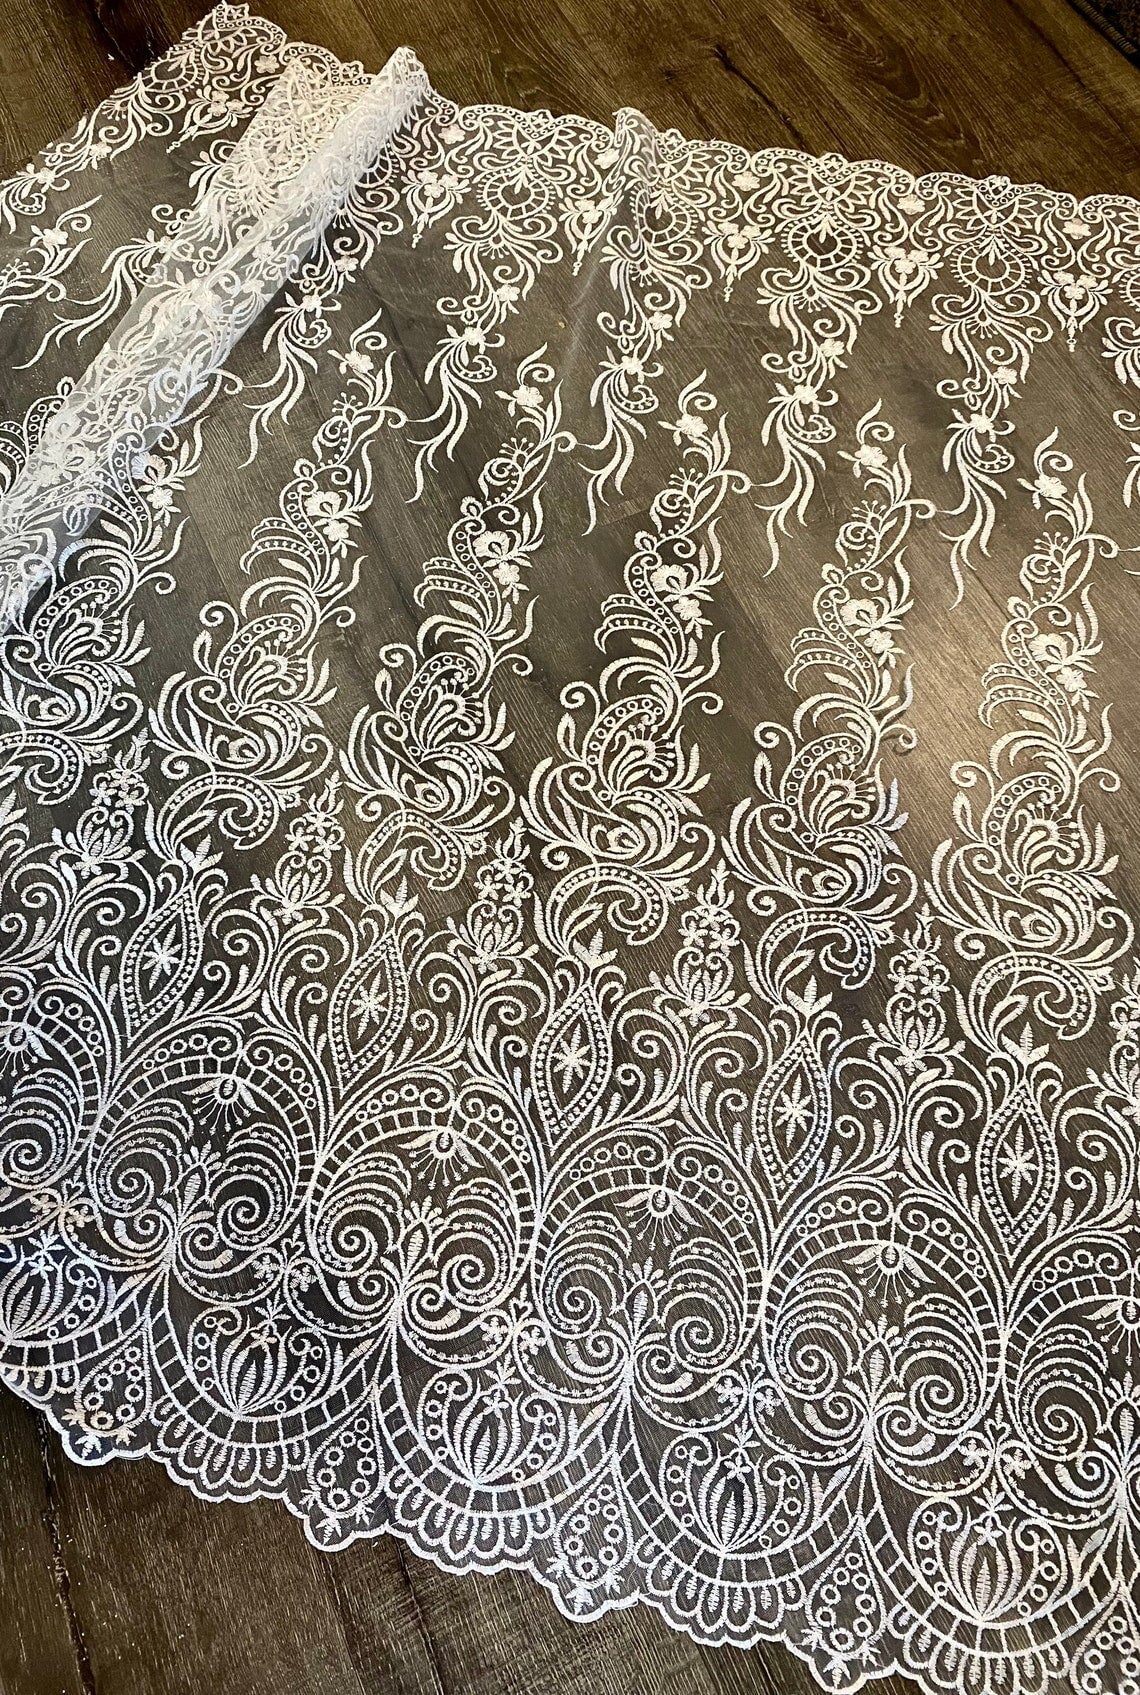 White Embroidered Lace, off white Embroidered Lace for gown, Bridal Lace Fabric, Scalloped lace, Floral Lace double edged, lace fabric on discount, lace fabric on sale, premium lace fabric, buy lace fabric online, glitter lace fabric